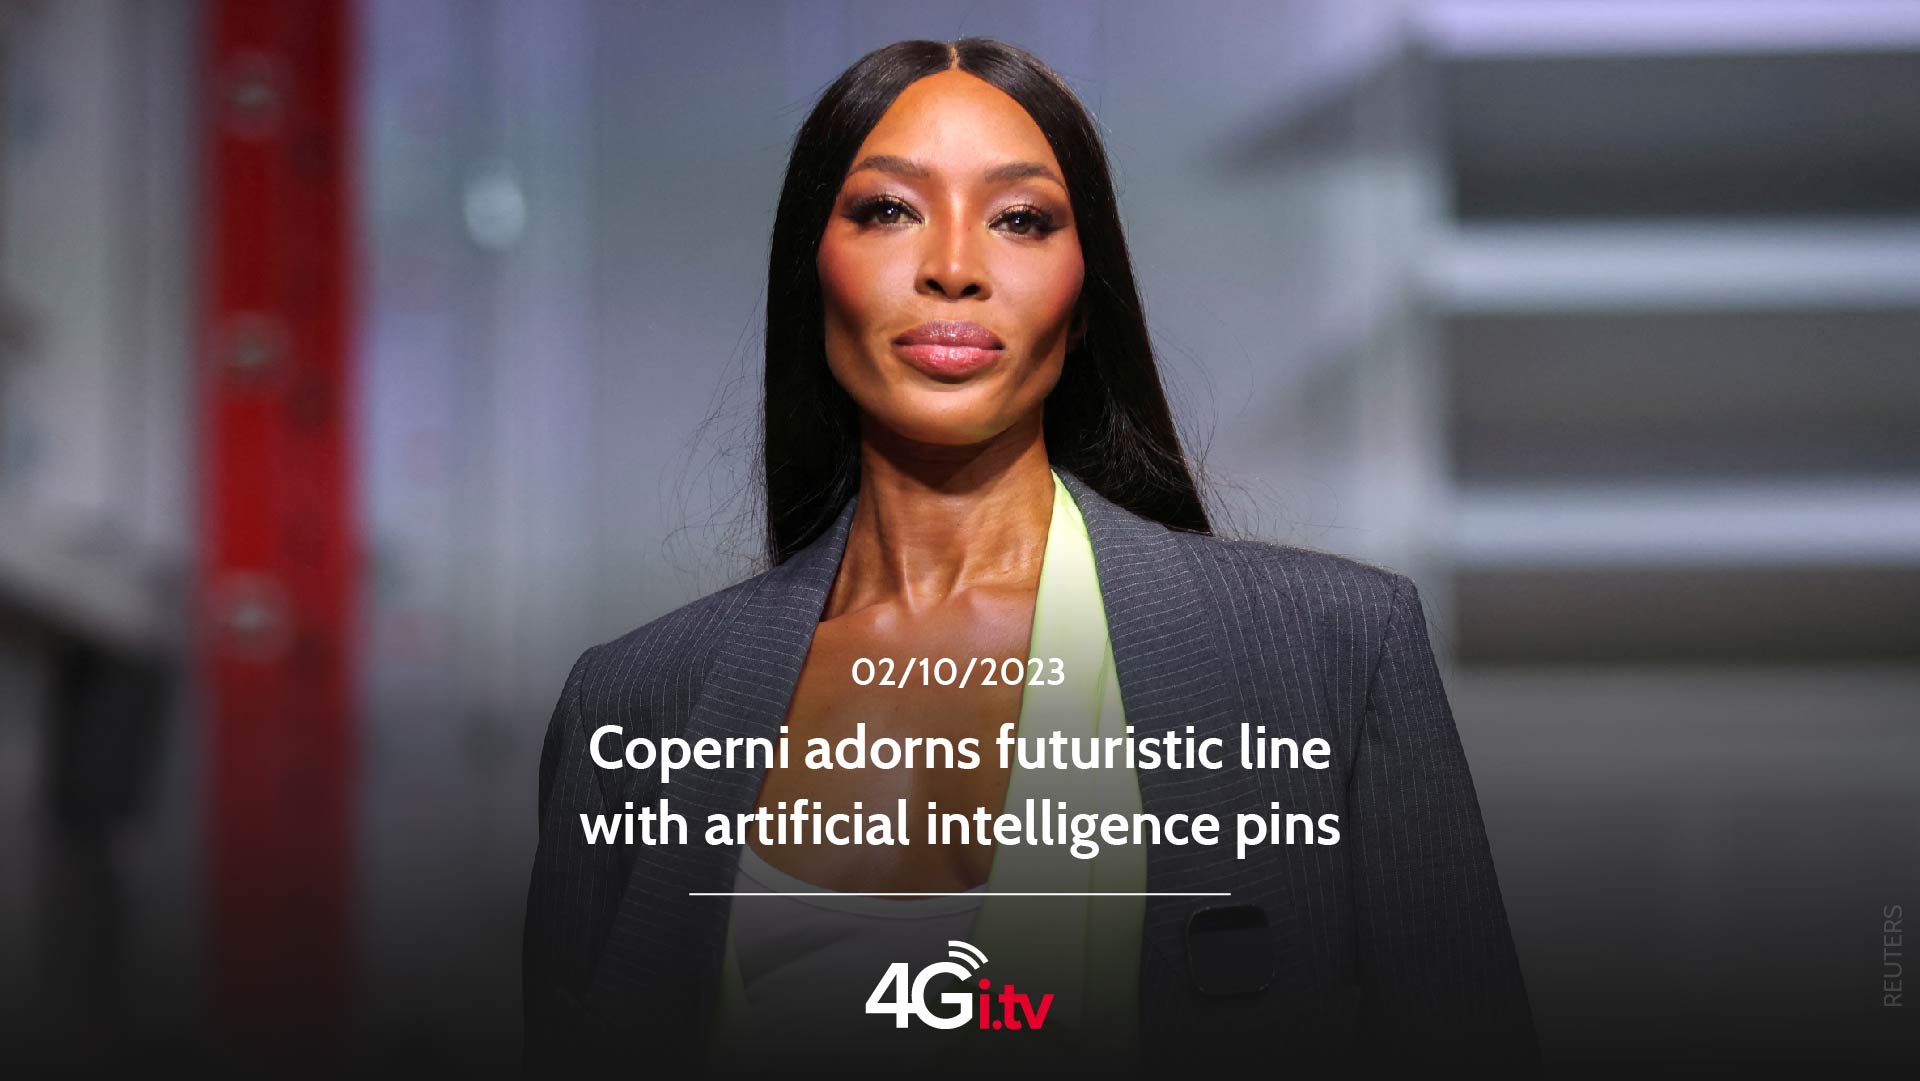 Read more about the article Coperni adorns futuristic line with artificial intelligence pins